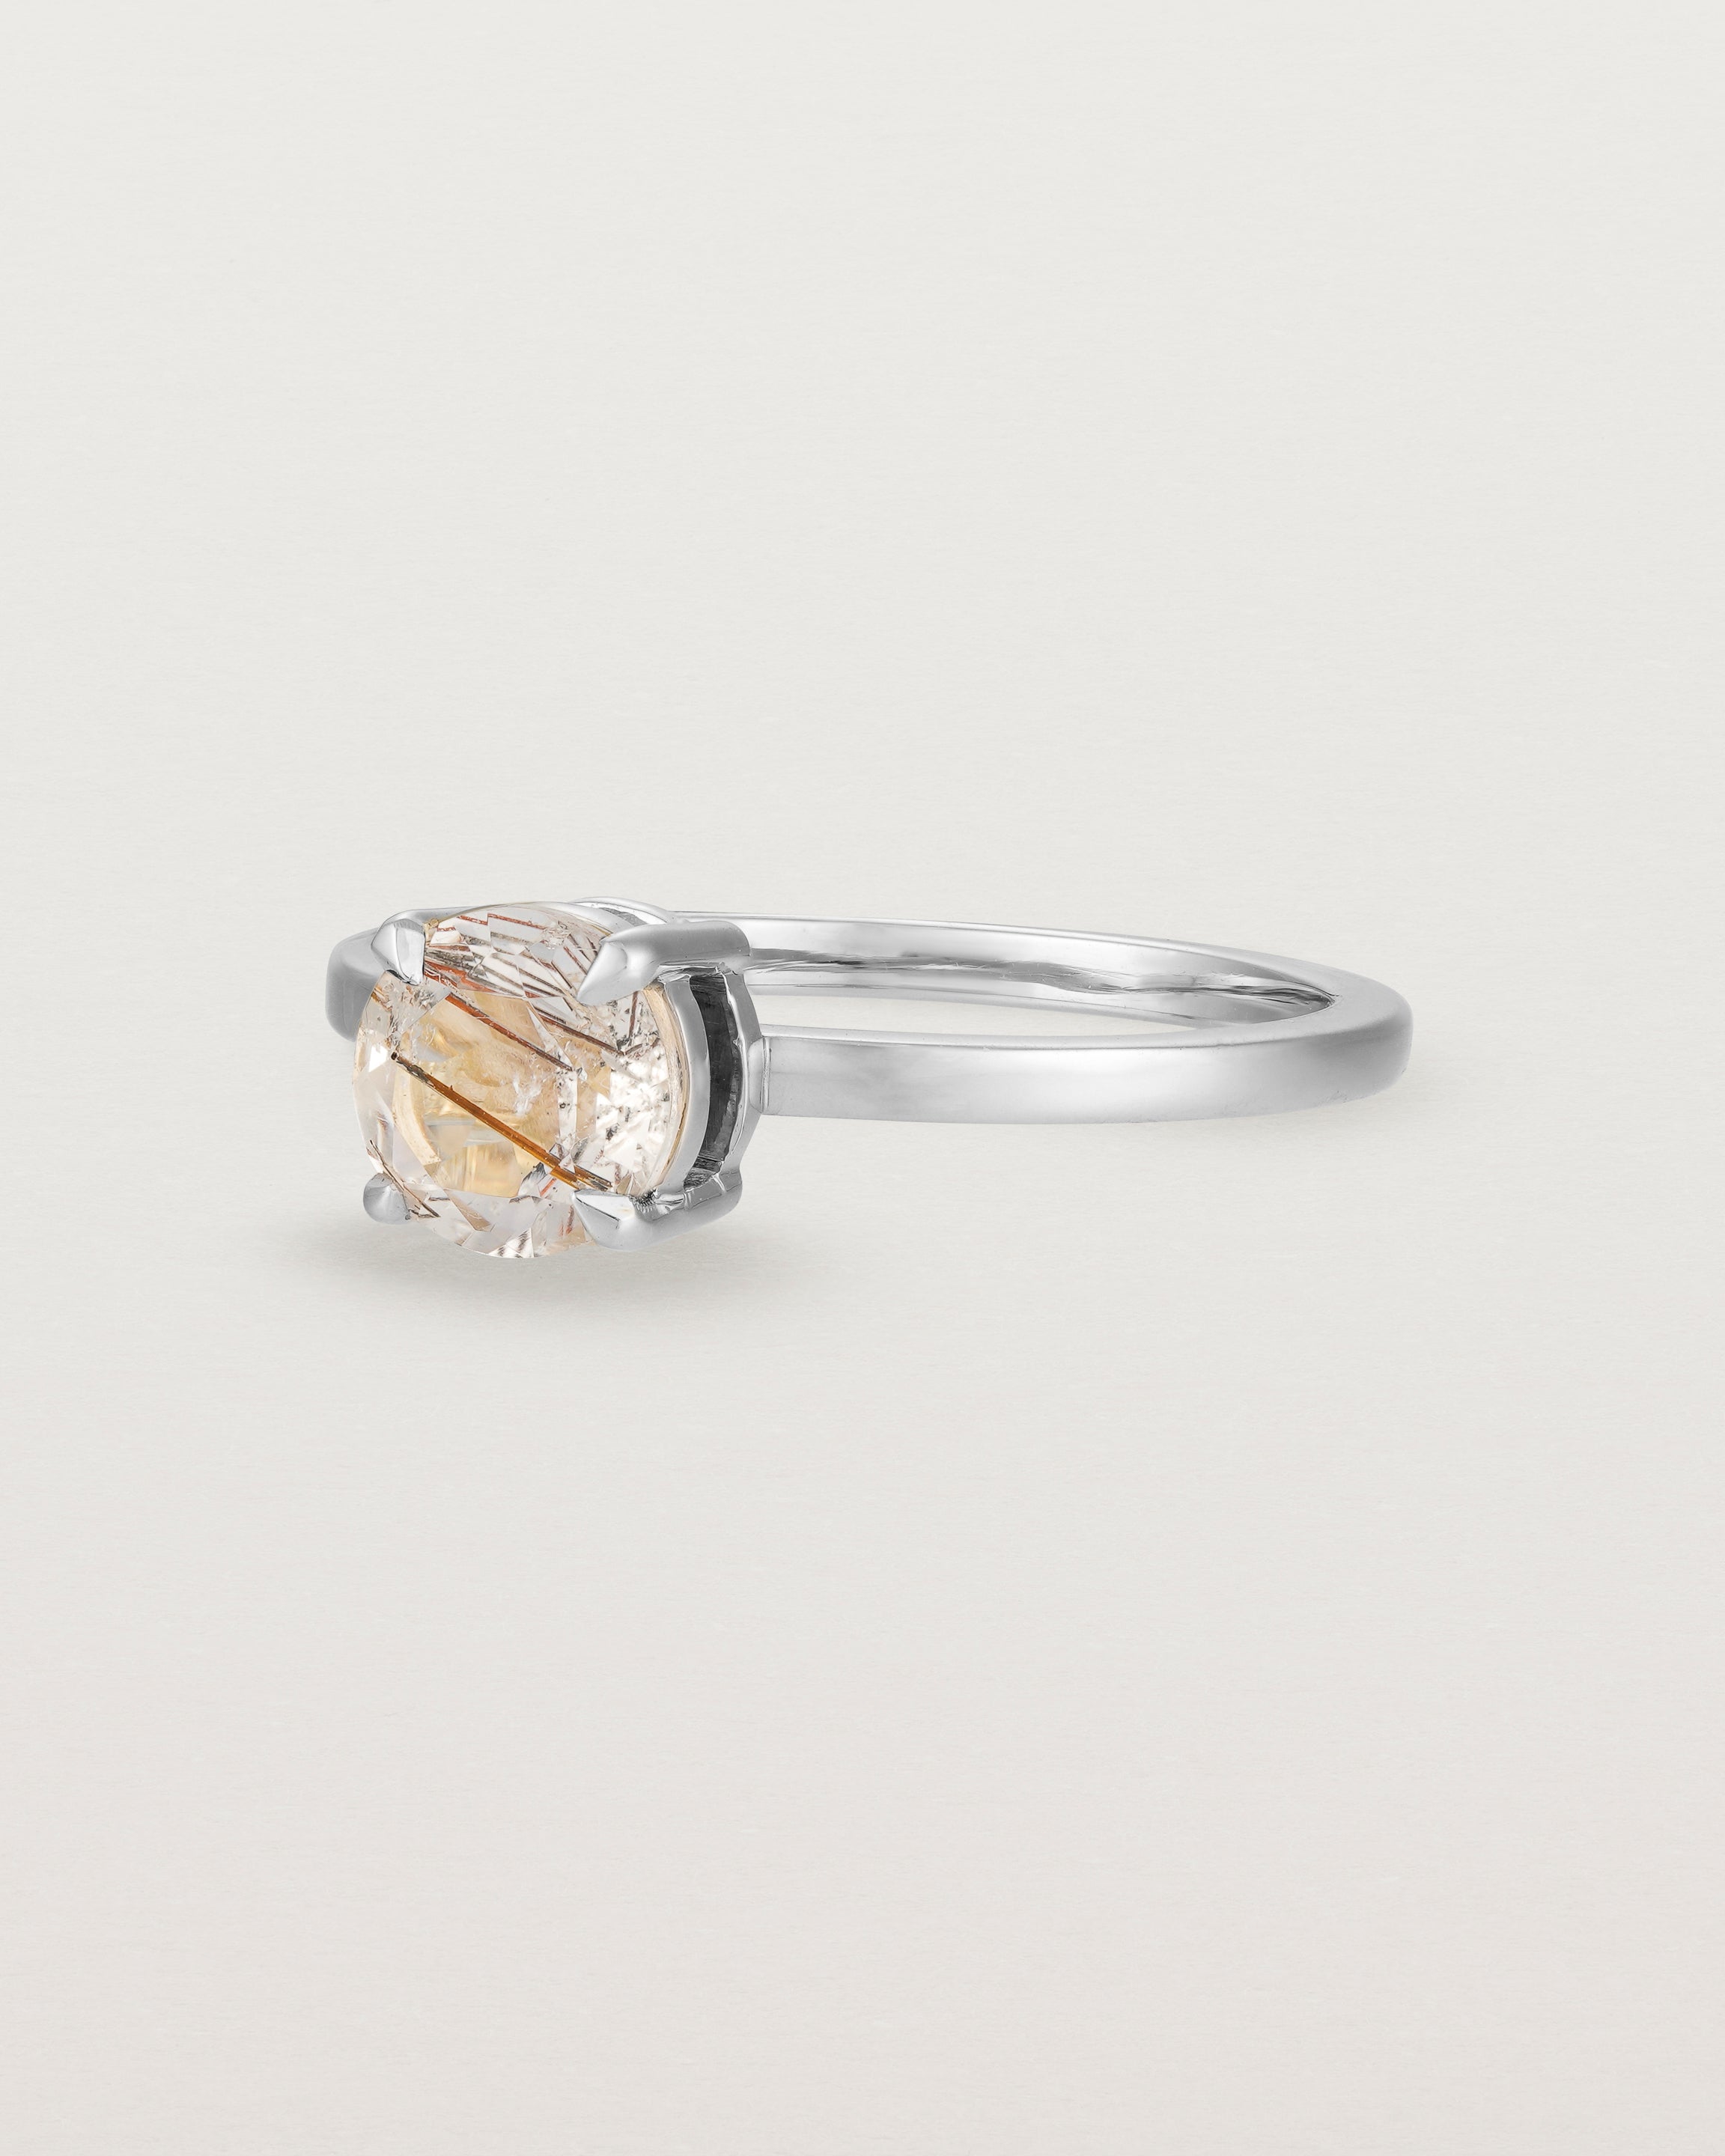 Angled view of the Petite Una Round Solitaire | Rutilated Quartz | White Gold.